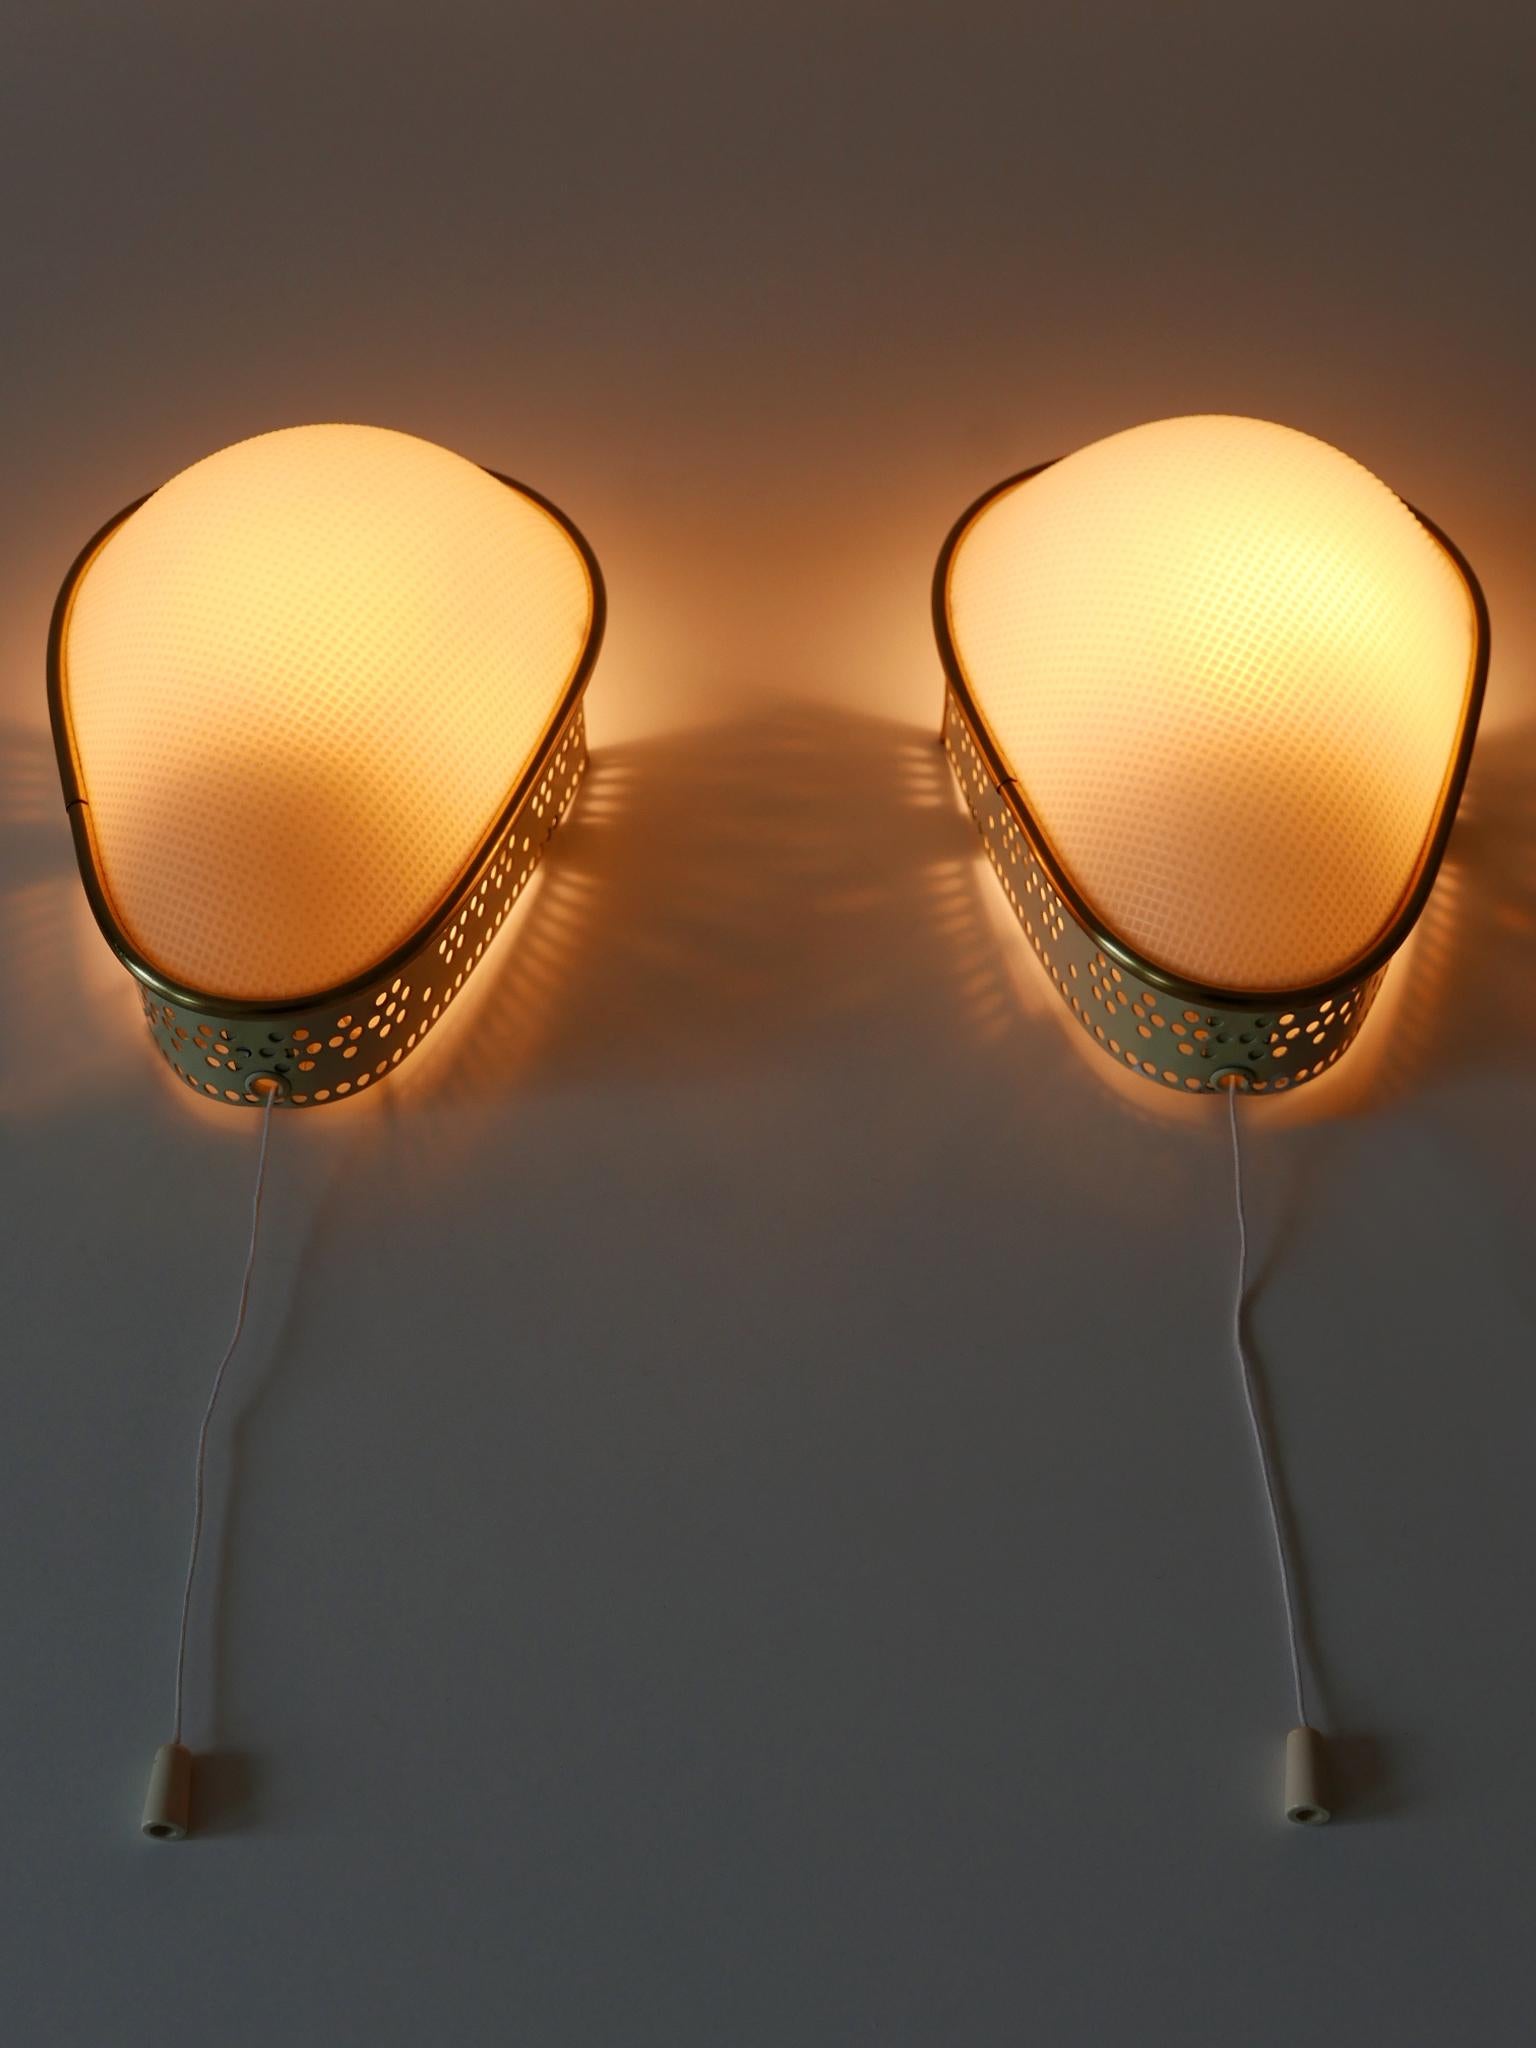 Plastic Set of Two Rare & Elegant Mid-Century Modern Sconces or Wall Lamps Germany 1950s For Sale